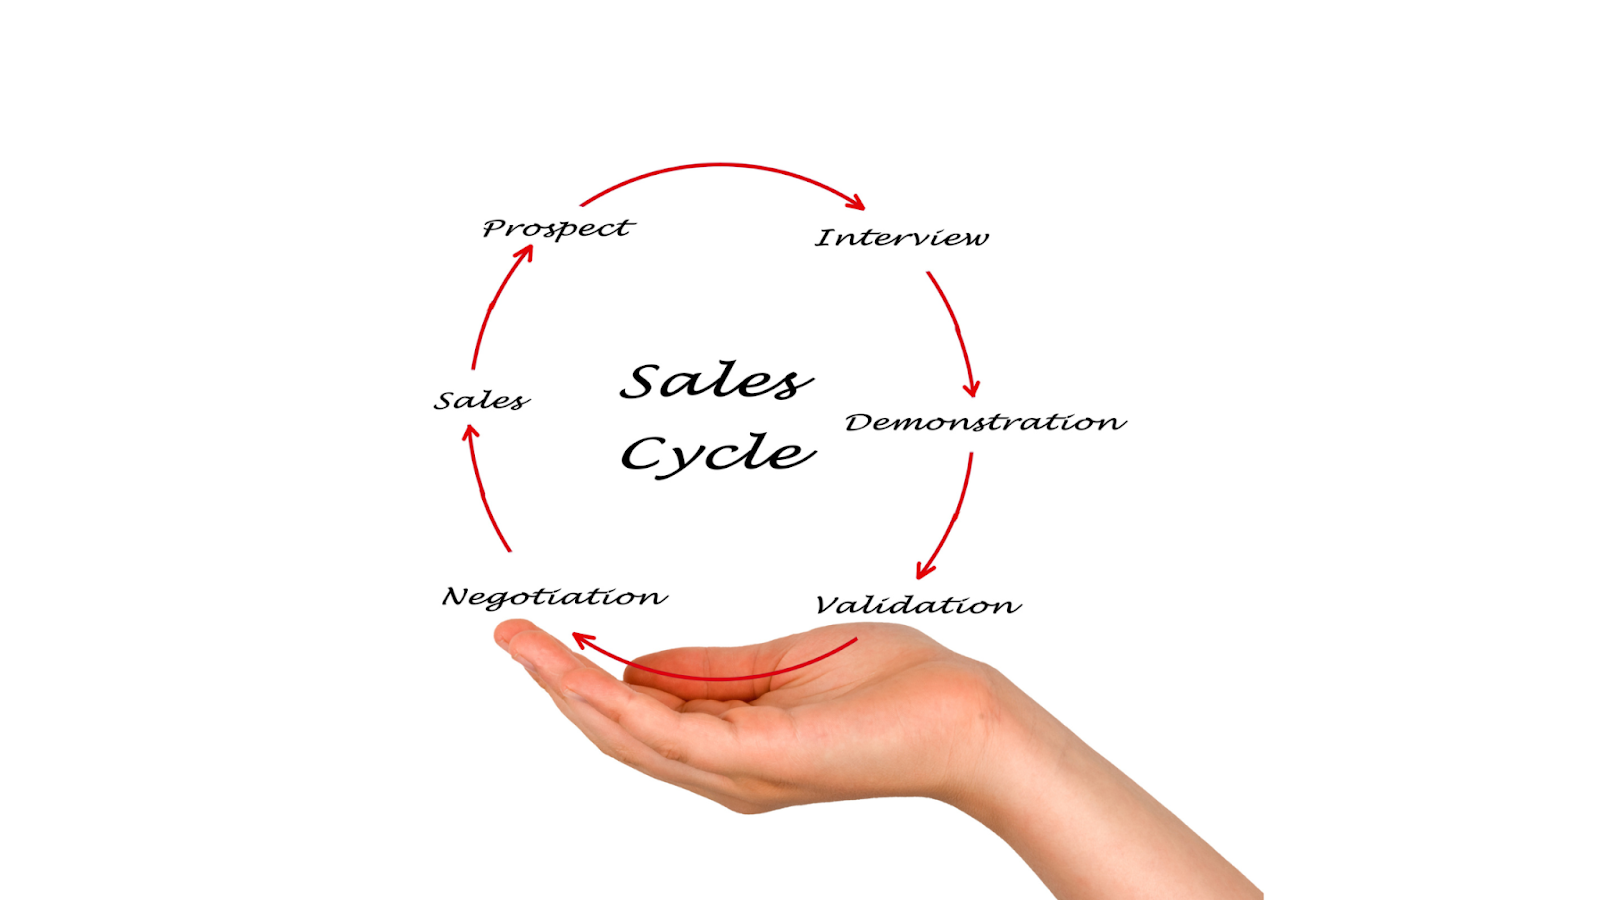 Cut Down on the Length of the Sales Cycle